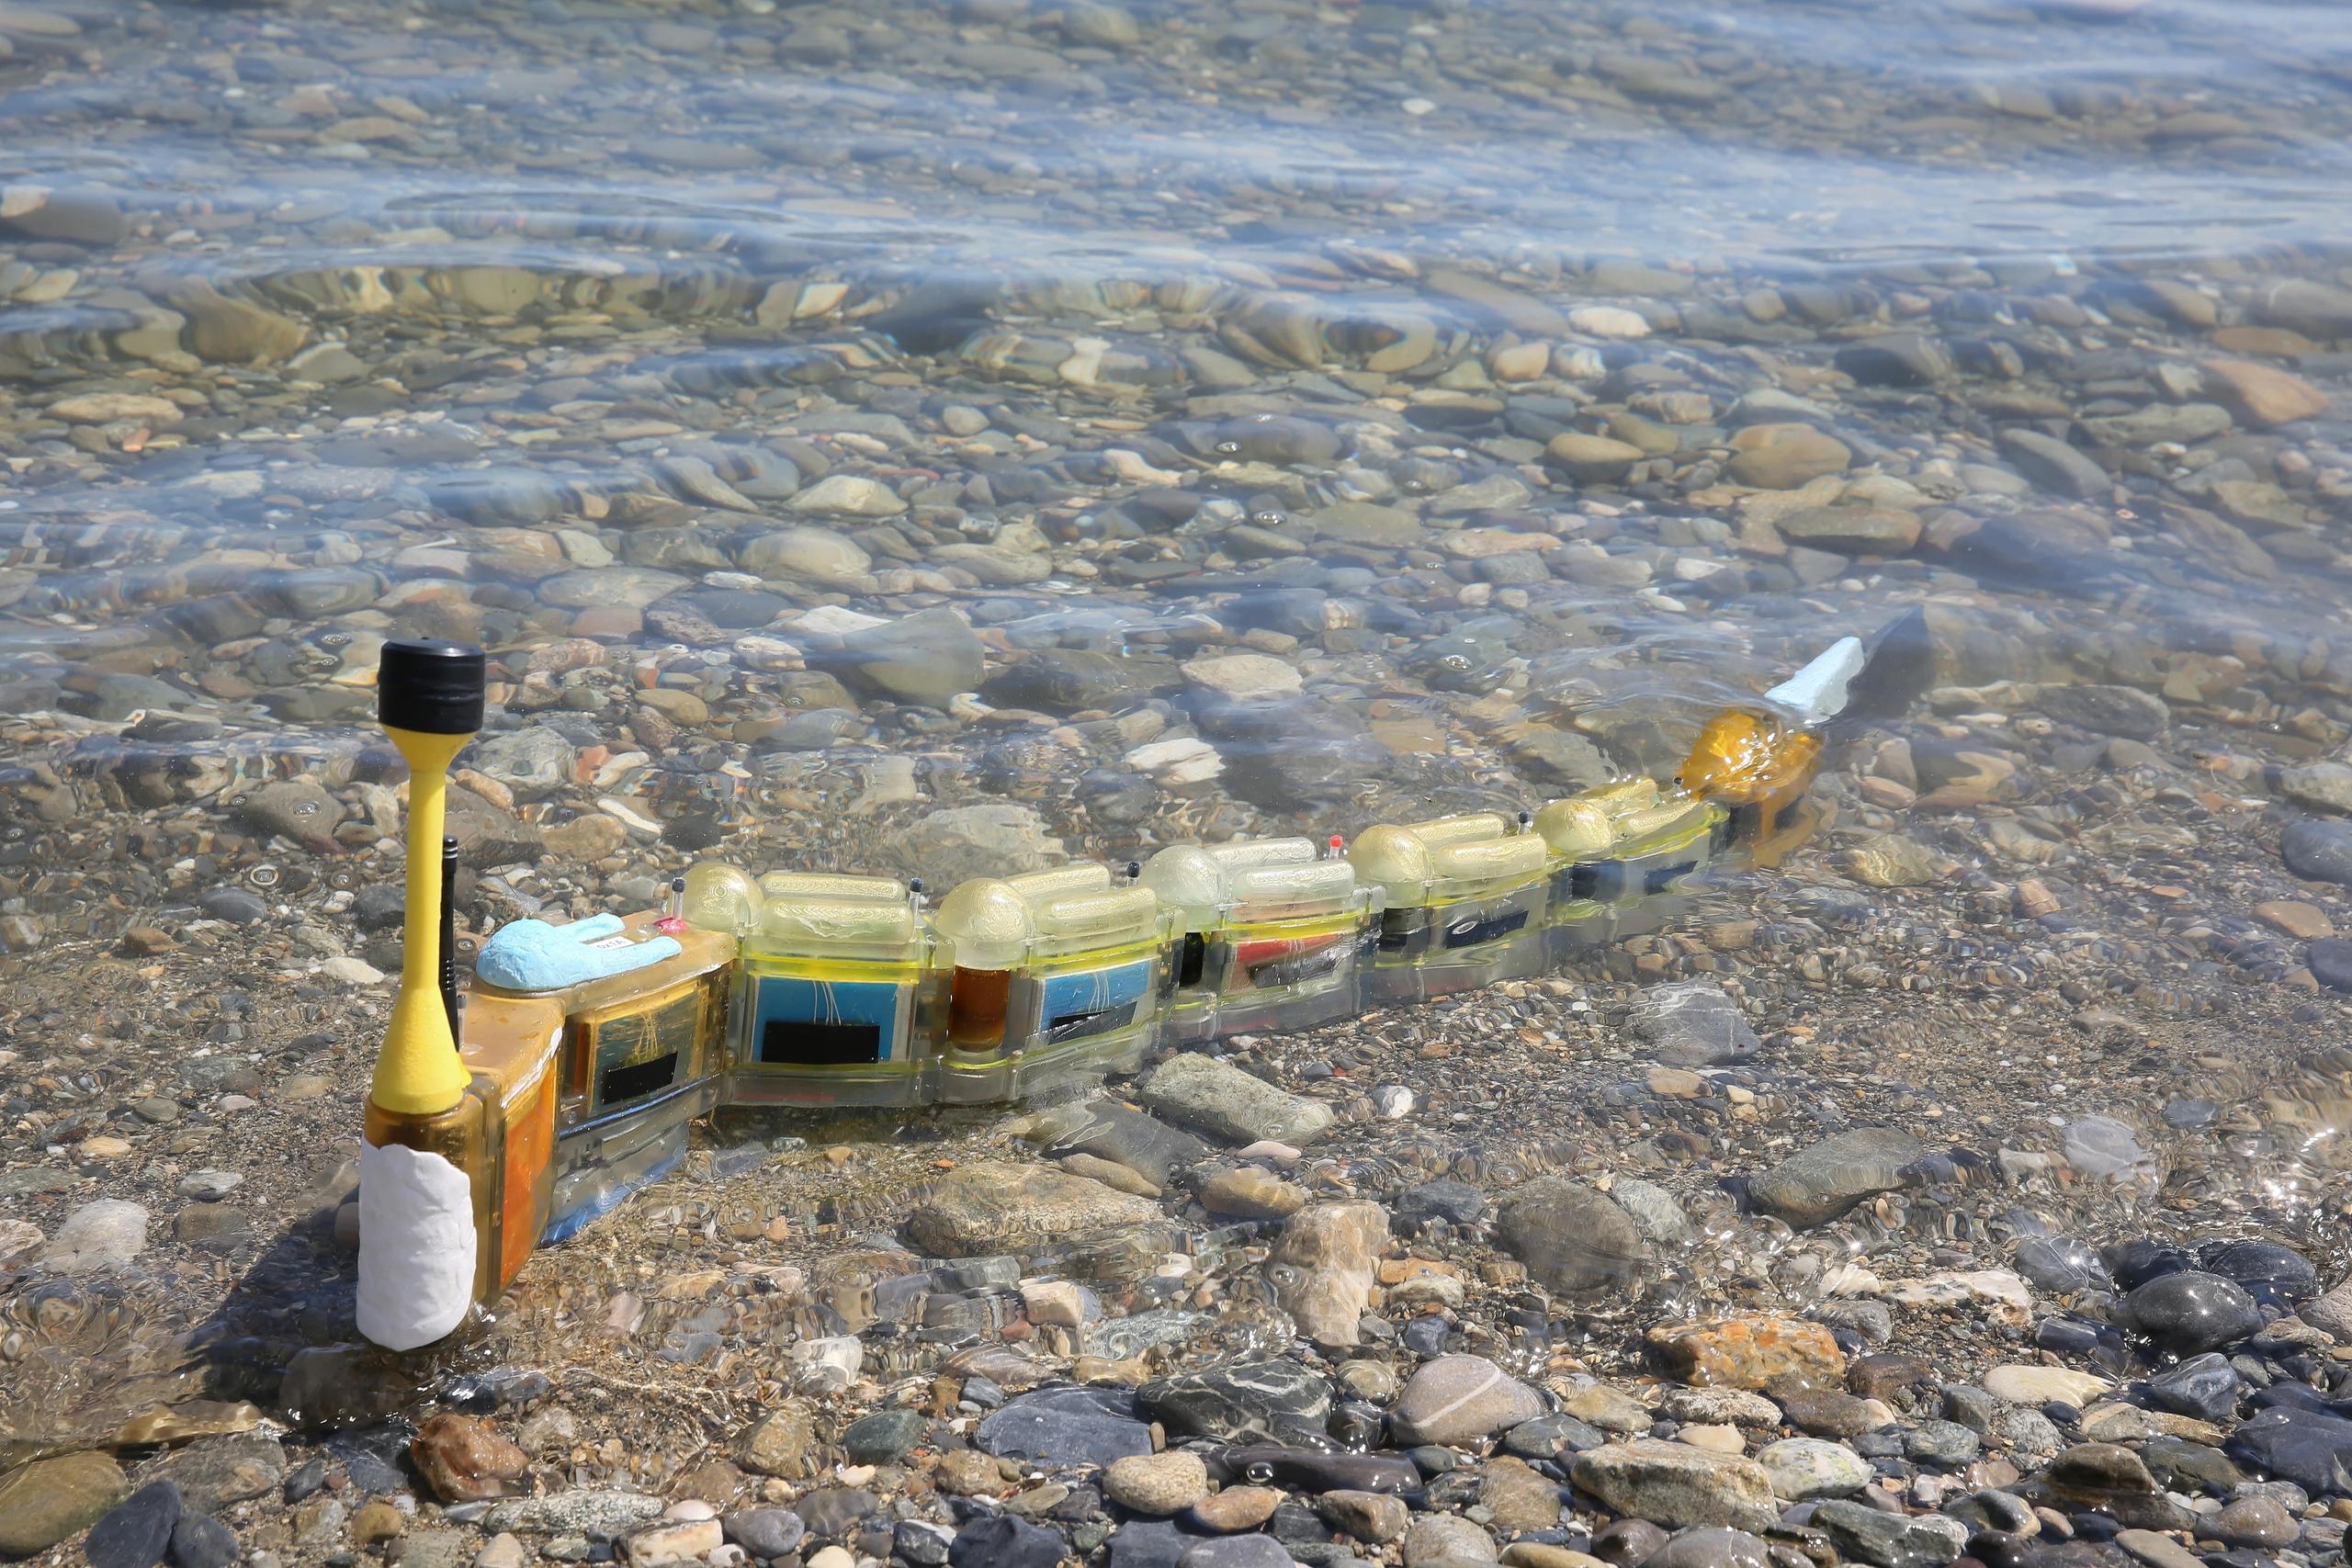 A robotic eel, Envirobot, developed by Swiss researchers to identify water pollution sources.